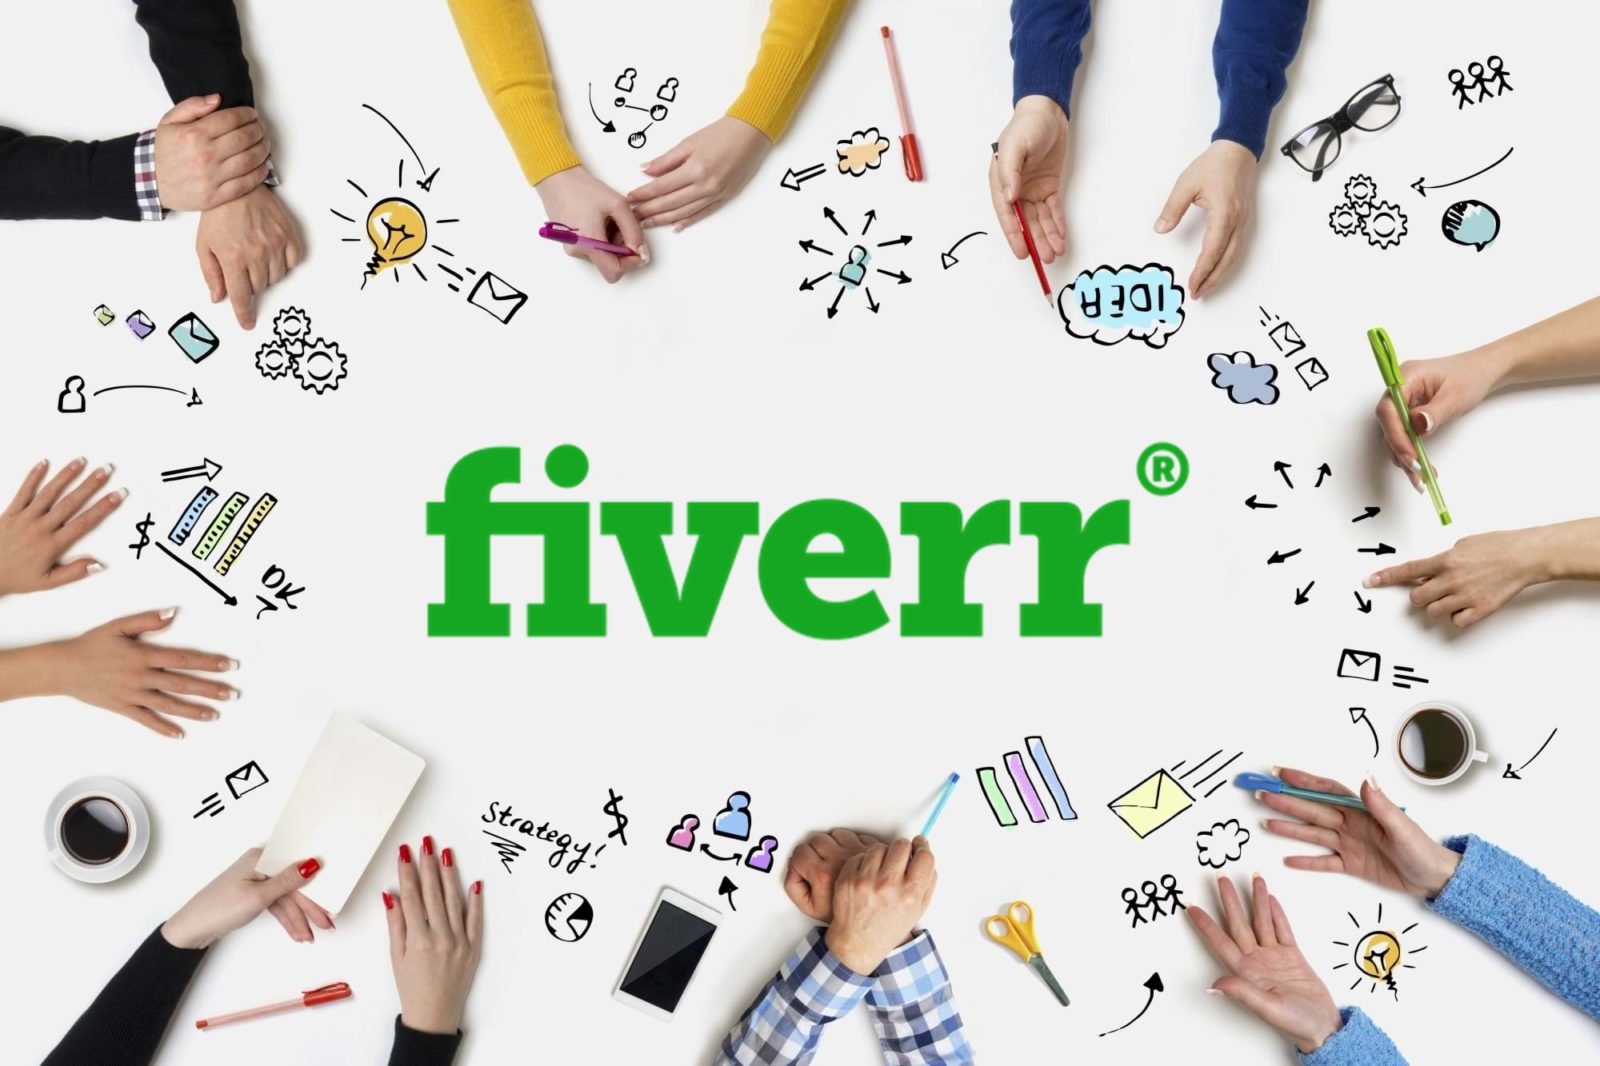 Easy Work on Fiverr: A Step-by-Step Guide